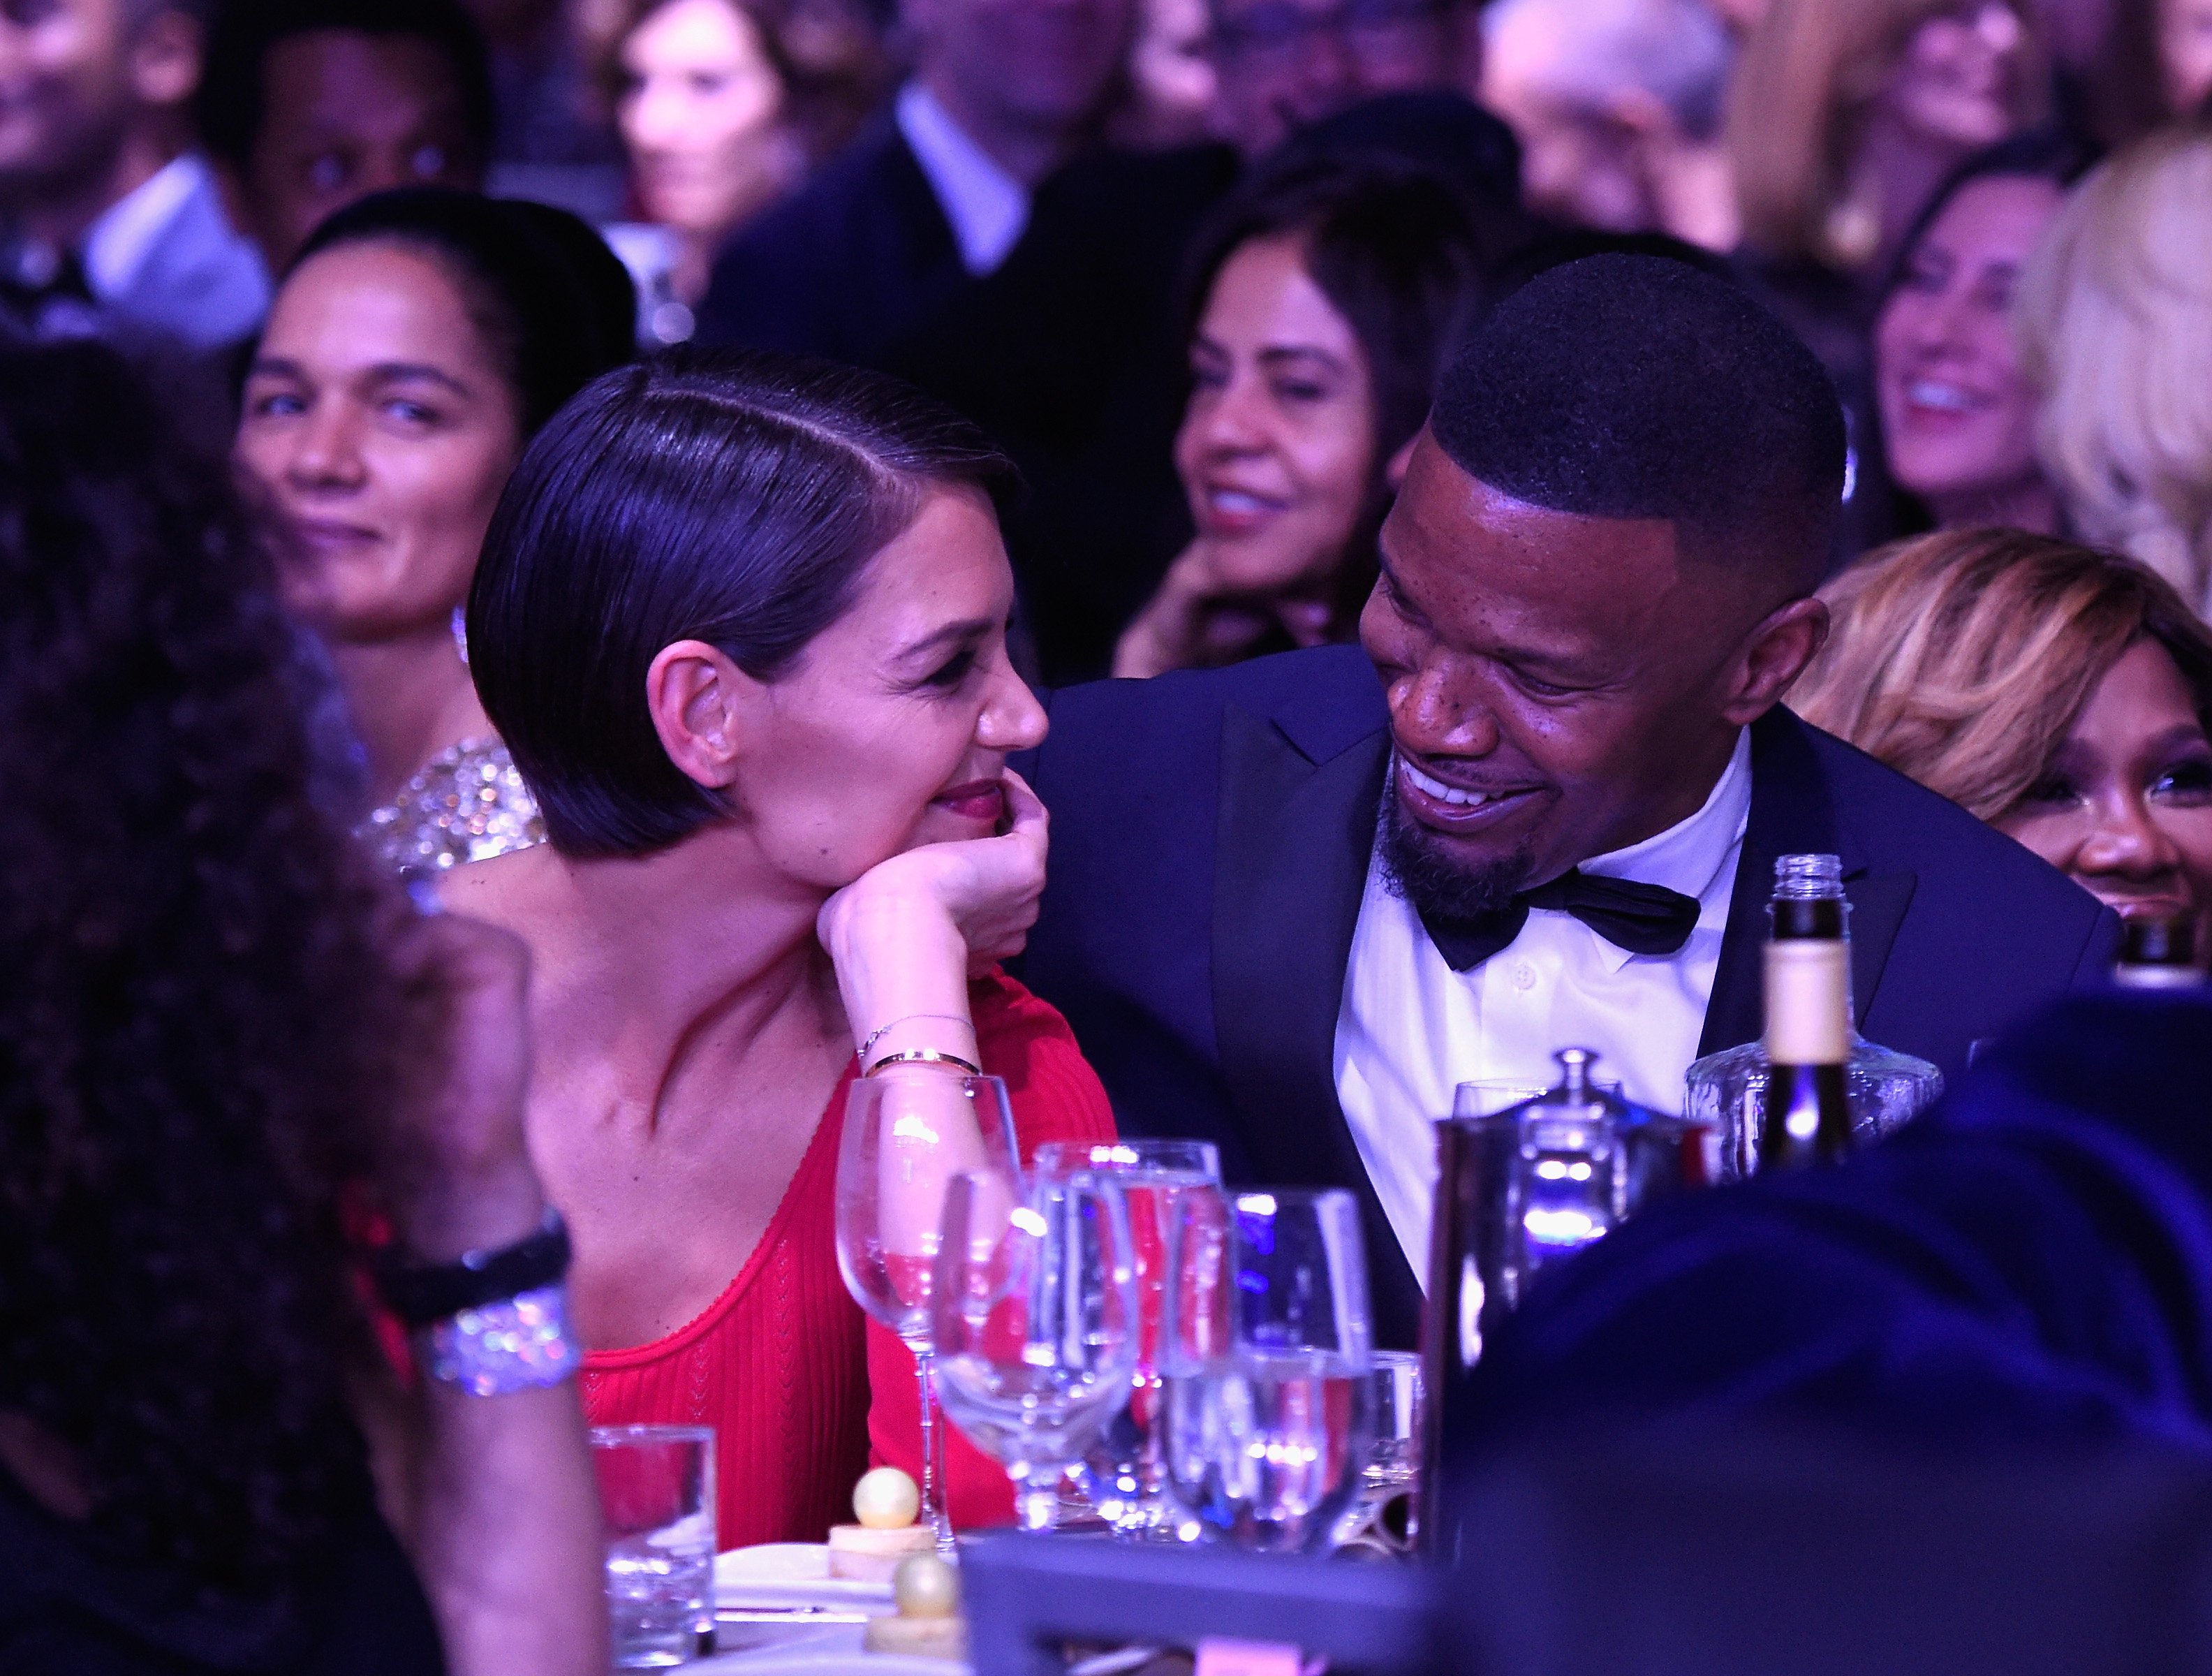 Katie Holmes and Jamie Foxx attend the Clive Davis and Recording Academy Pre-GRAMMY Gala on January 27, 2018 in New York City. | Photo: Getty Images